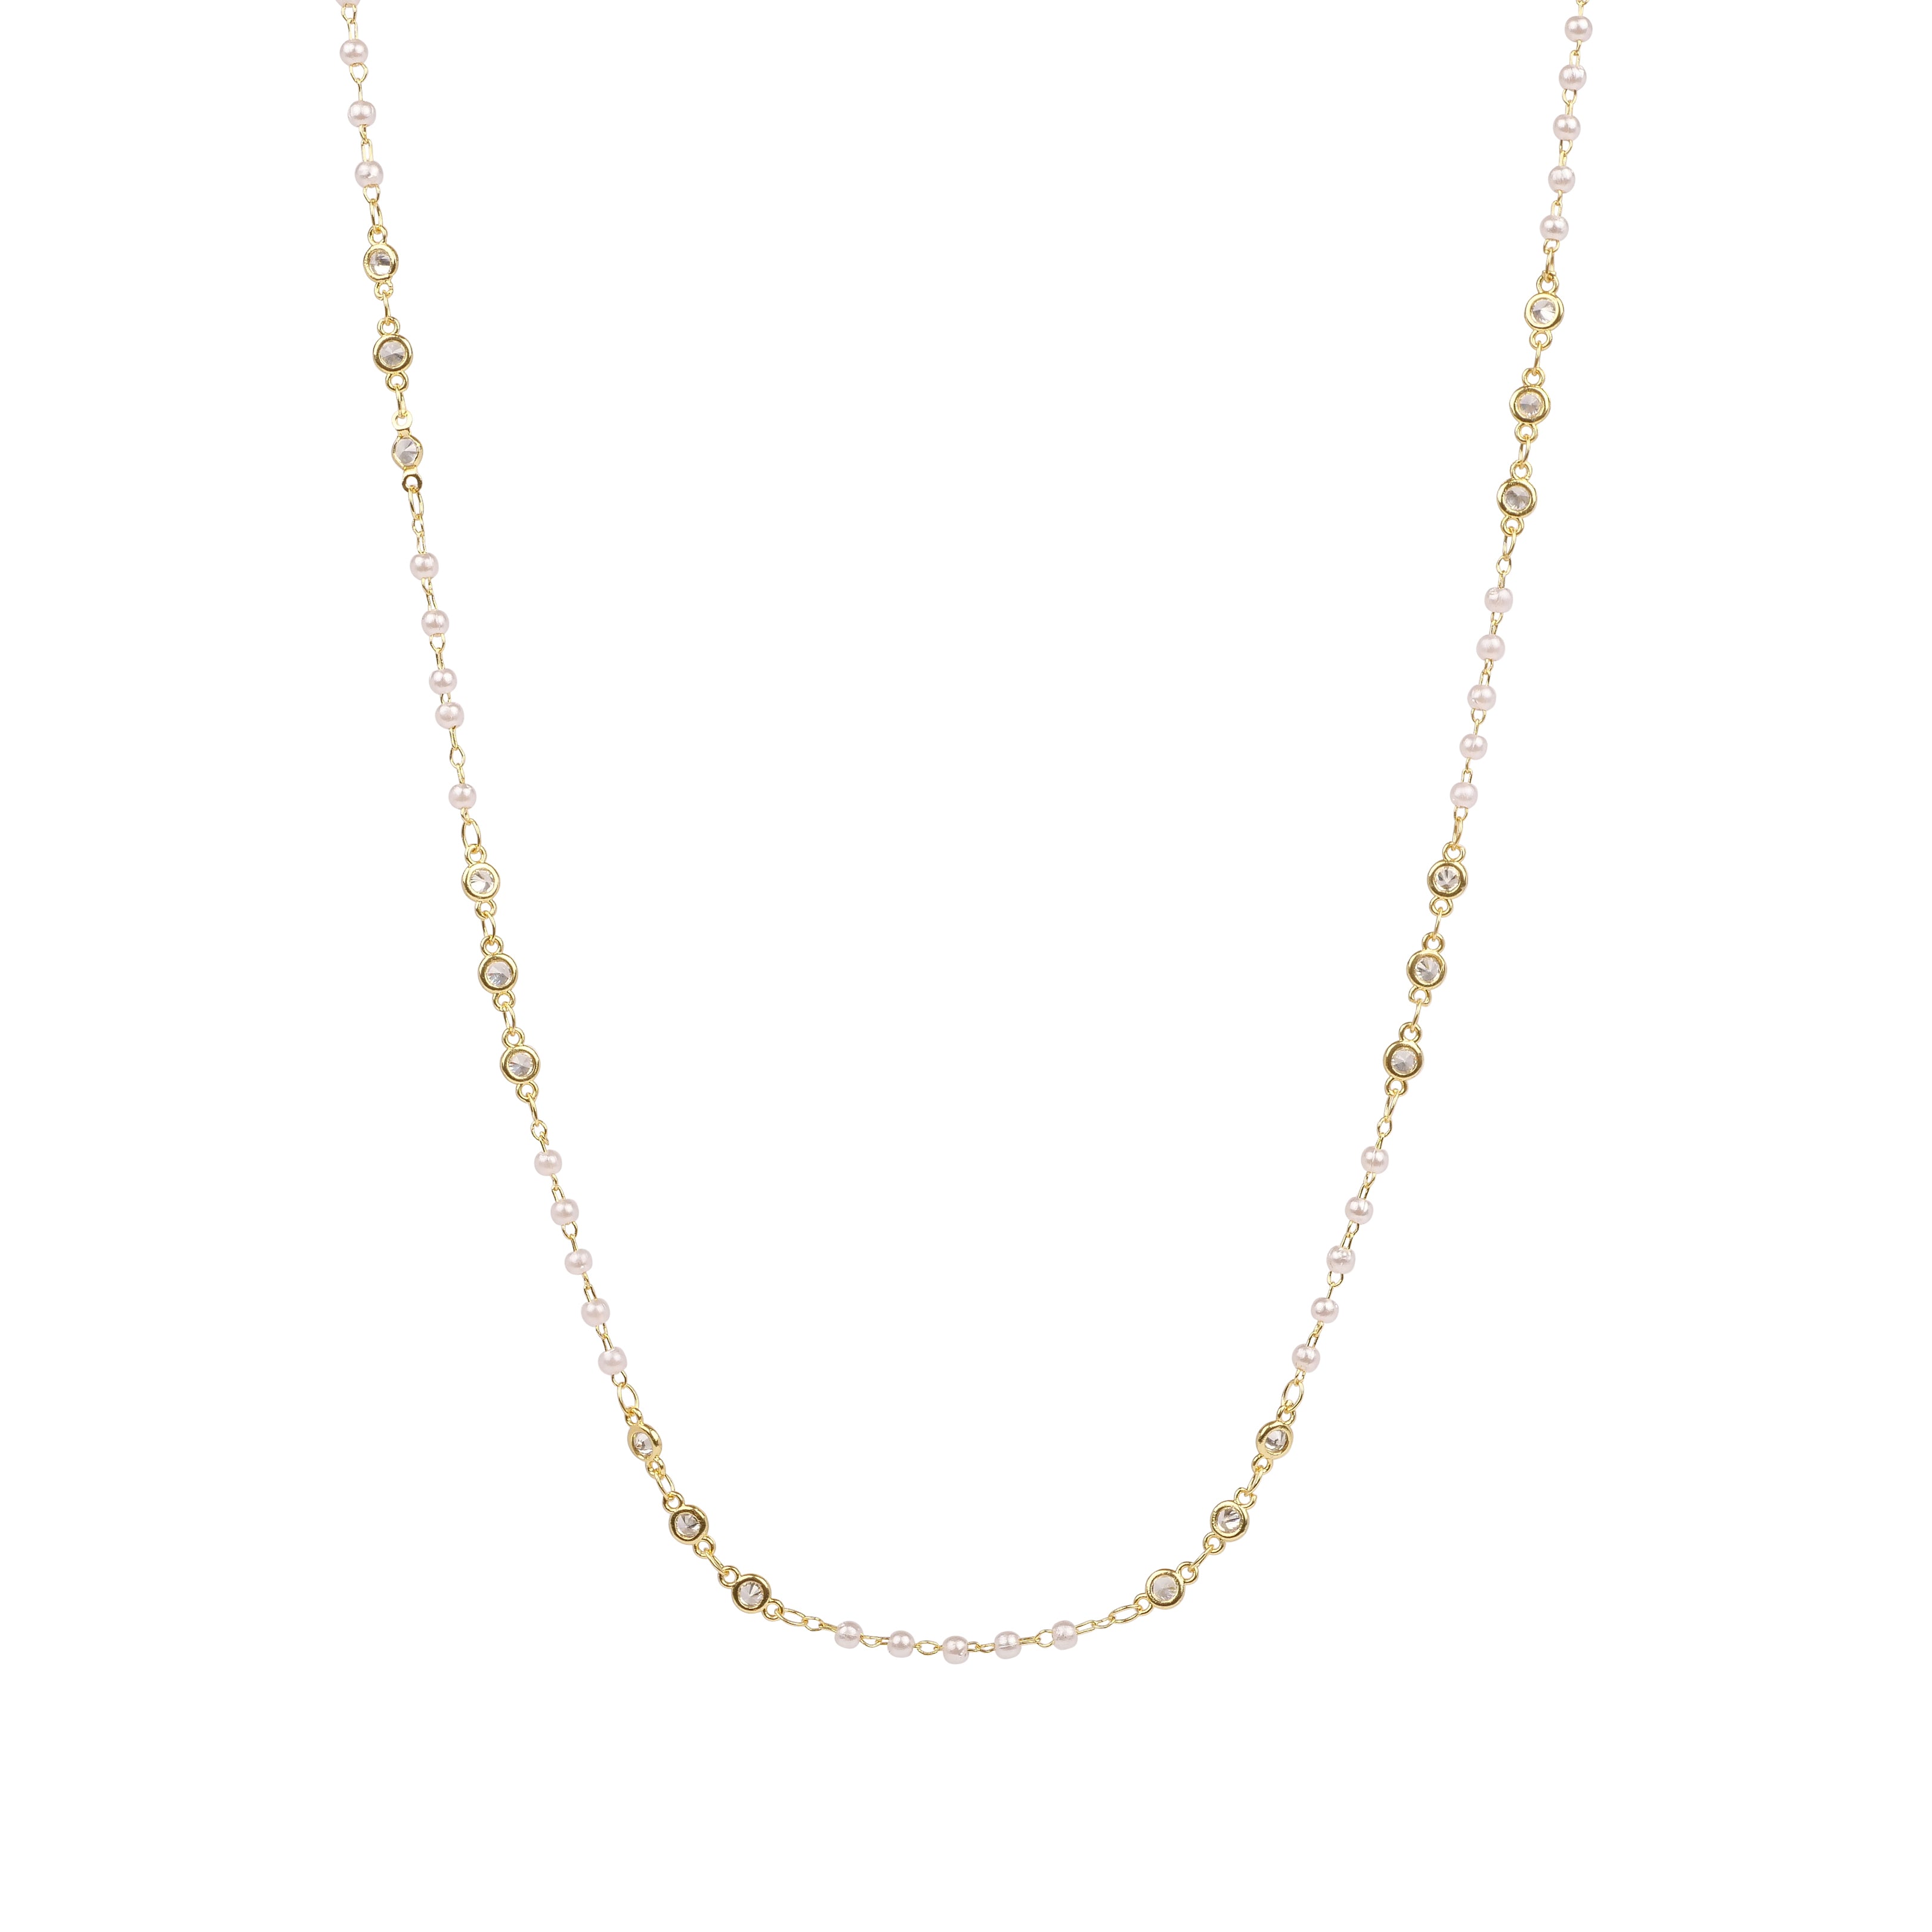 Delicate Pearl and White Crystal Chain